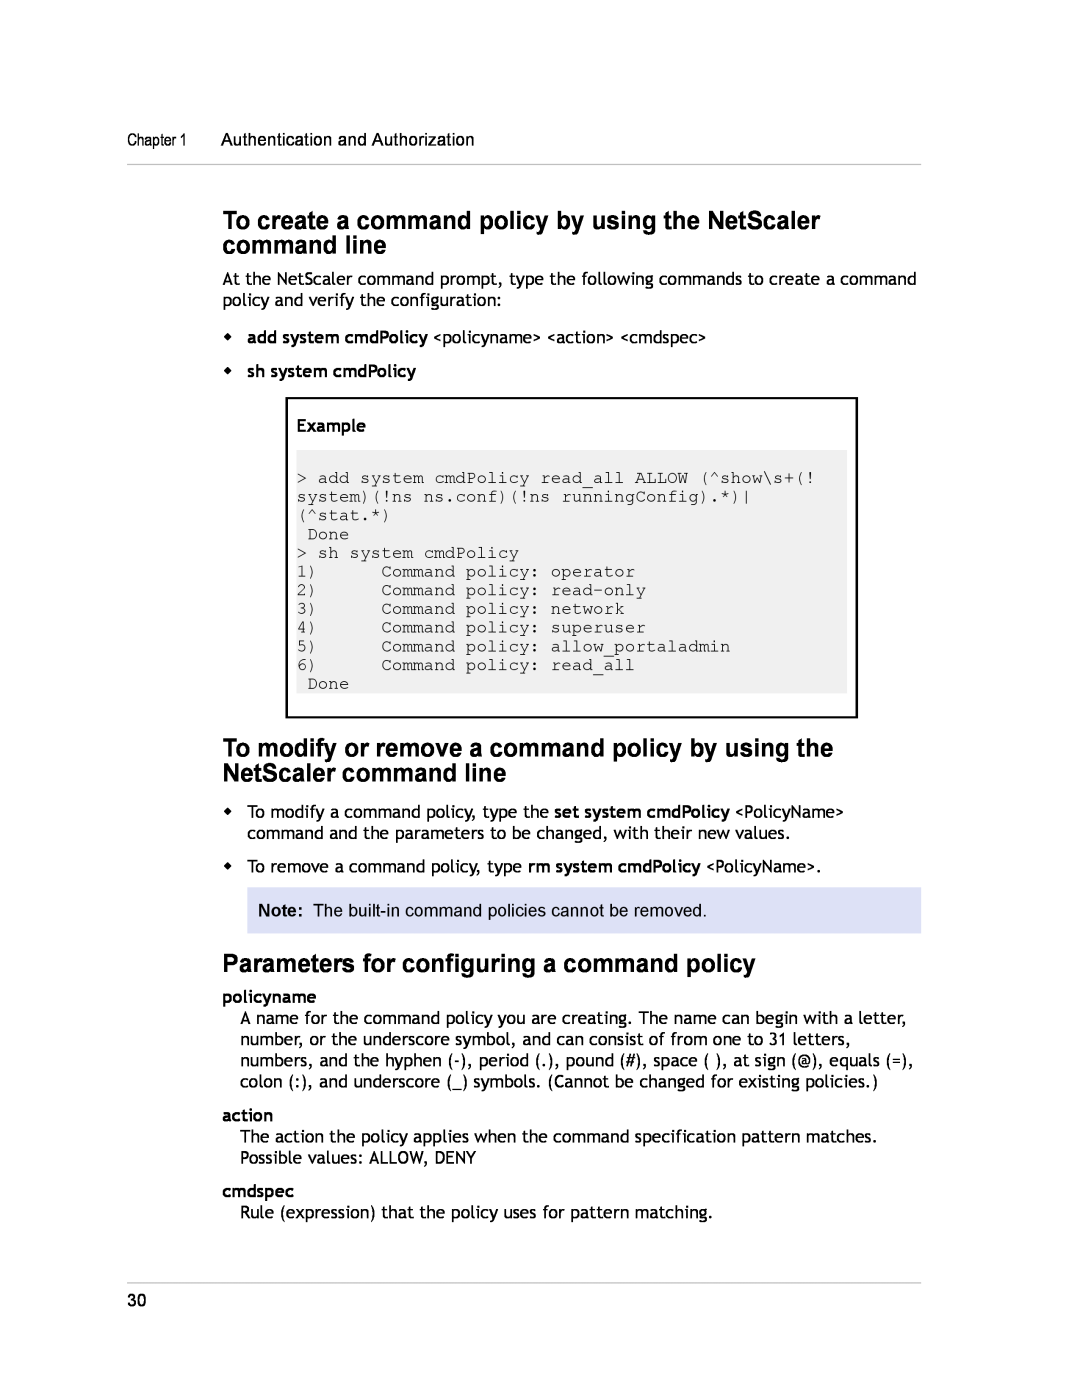 Citrix Systems CITRIX NETSCALER 9.3 To create a command policy by using the NetScaler command line, policyname, action 